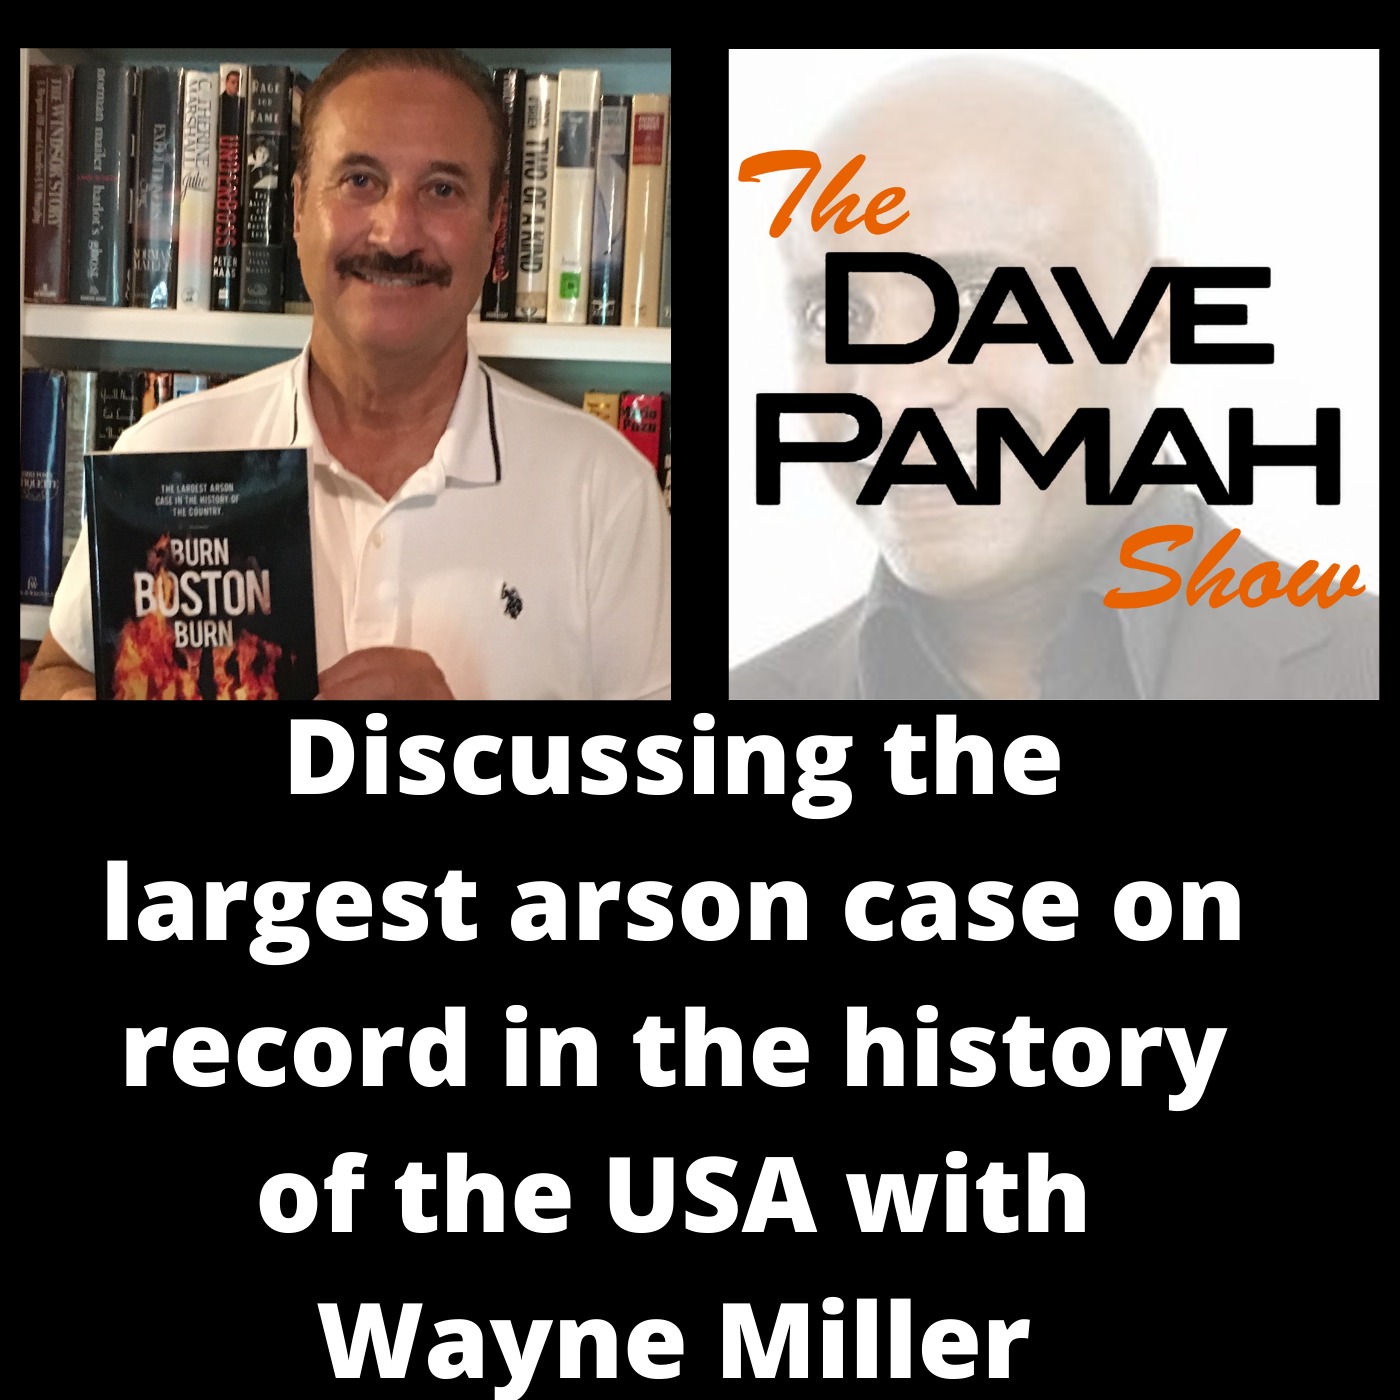 Discussing the largest arson case on record in the history of the USA with Wayne Miller